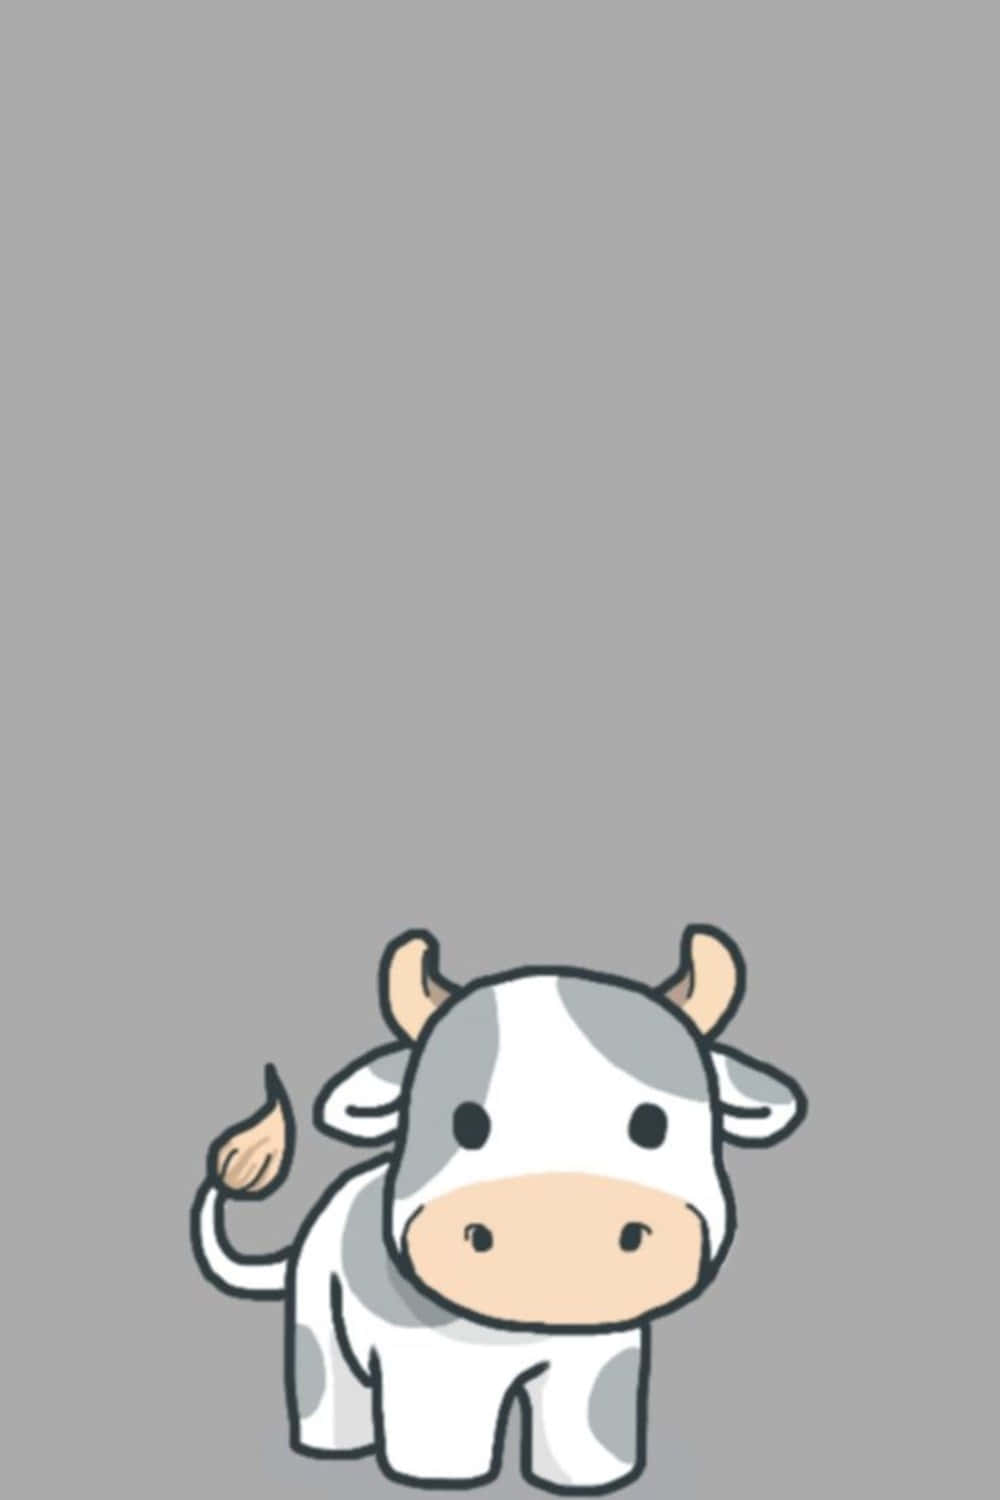 A Cow With Horns On A Gray Background Background